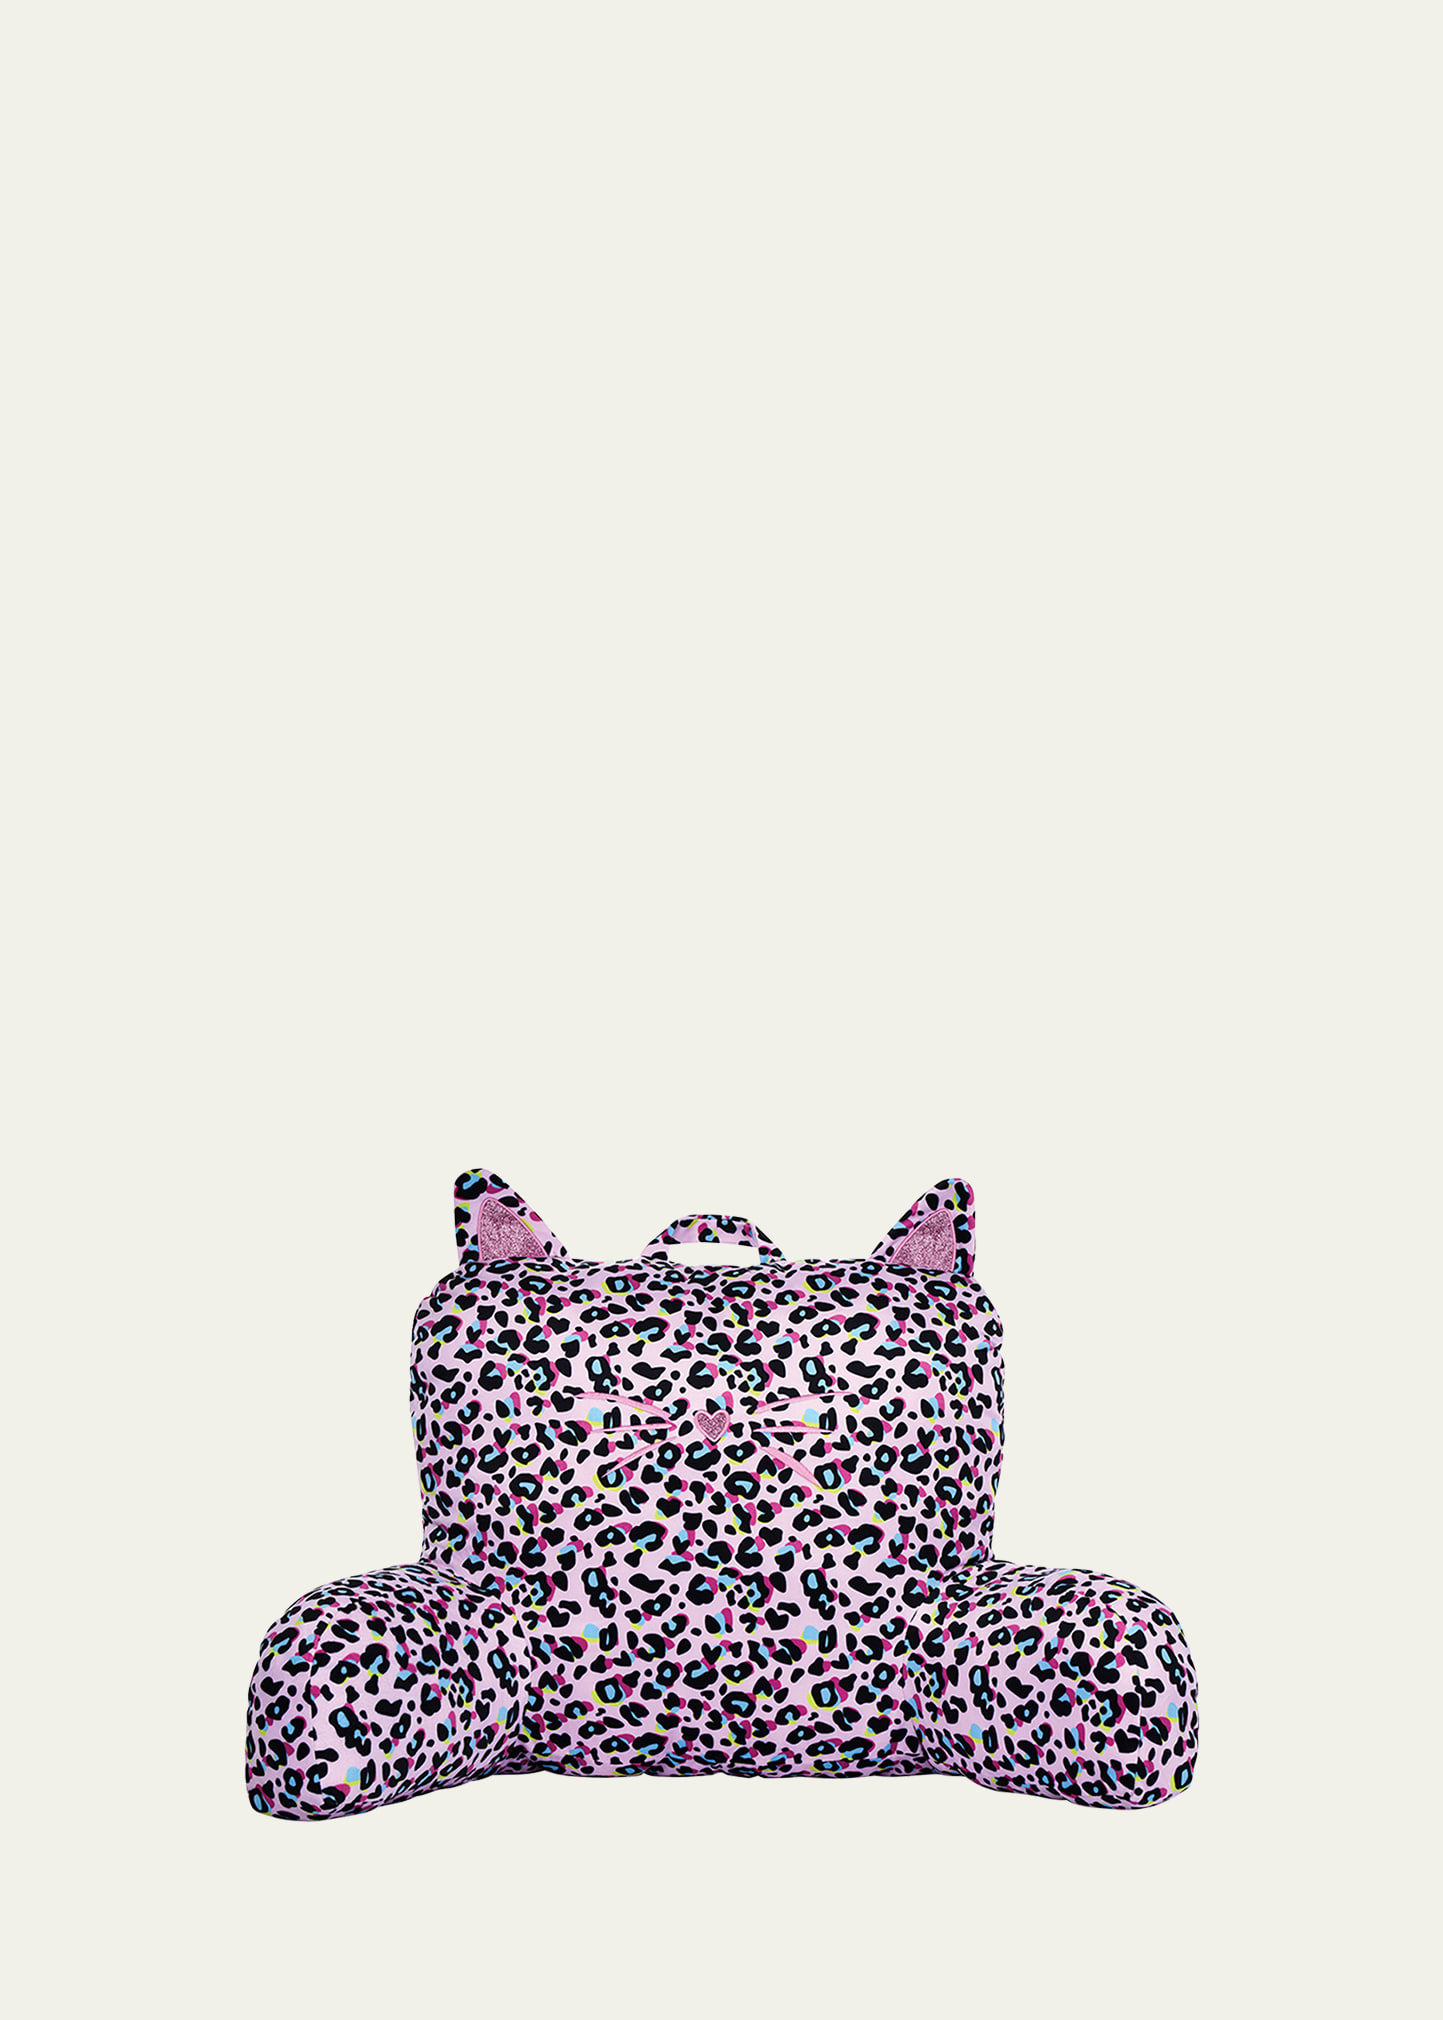 Iscream Girl's Pink Leopard Lounge Pillow